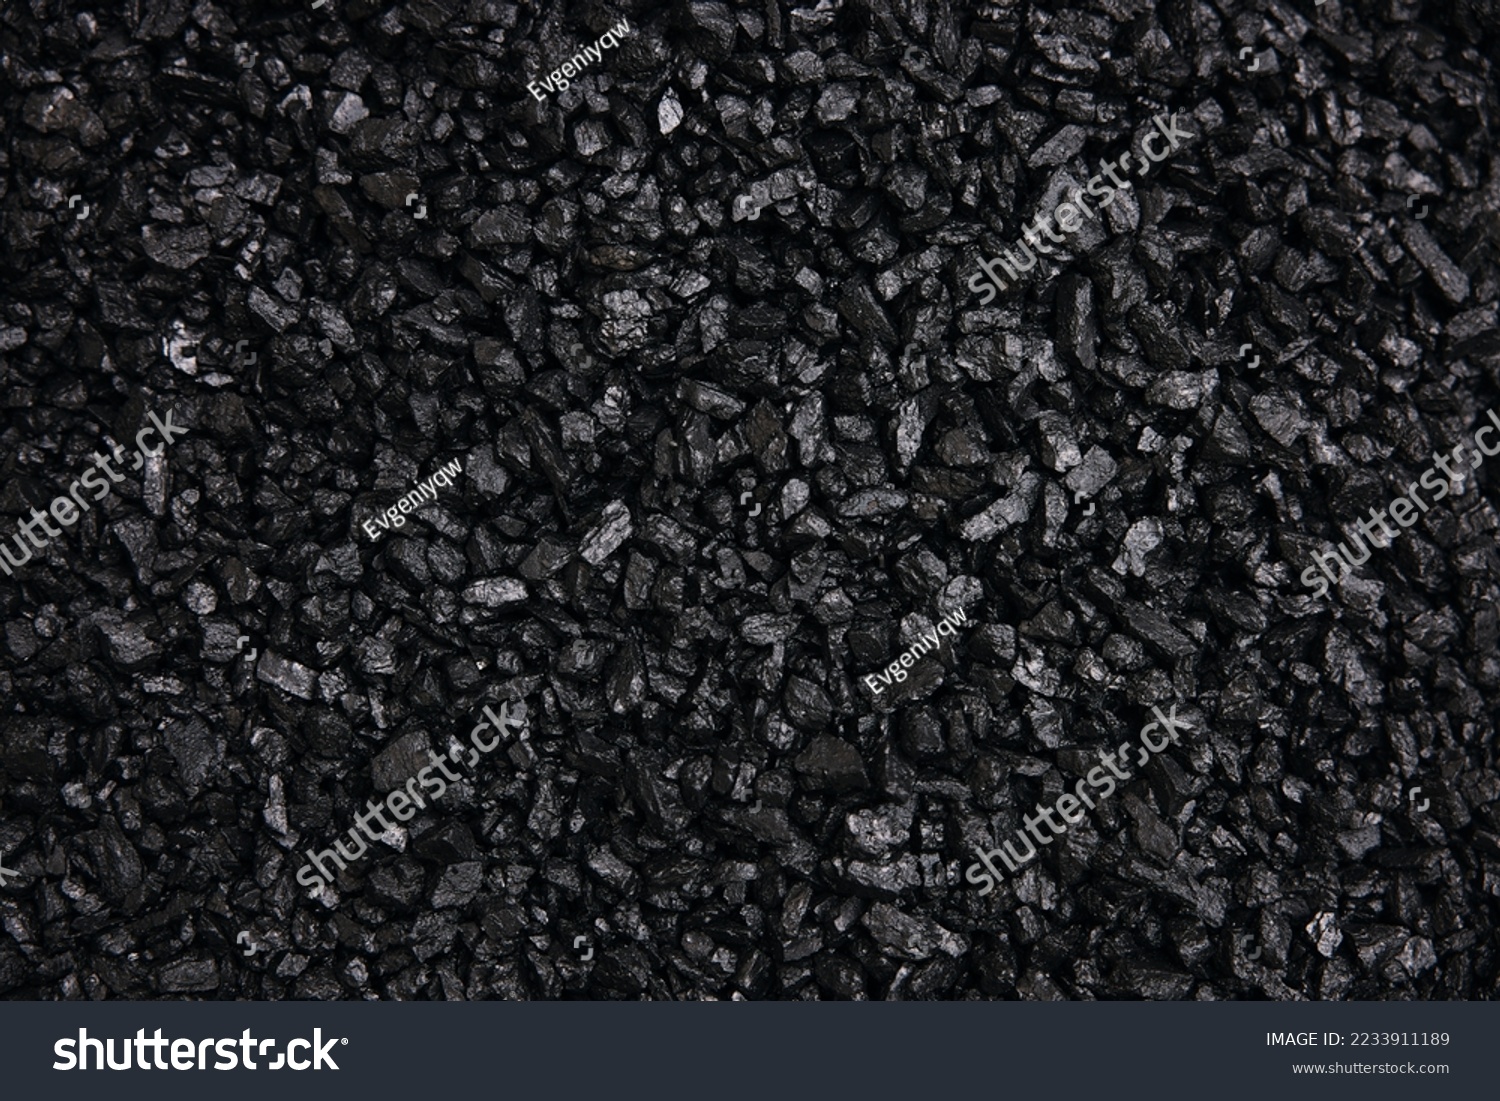 Fuel for furnace heating - hard coal. Pile of natural black hard coal for texture background. Best grade of metallurgical anthracite coals often referred to as stone coal and black diamond coal. #2233911189